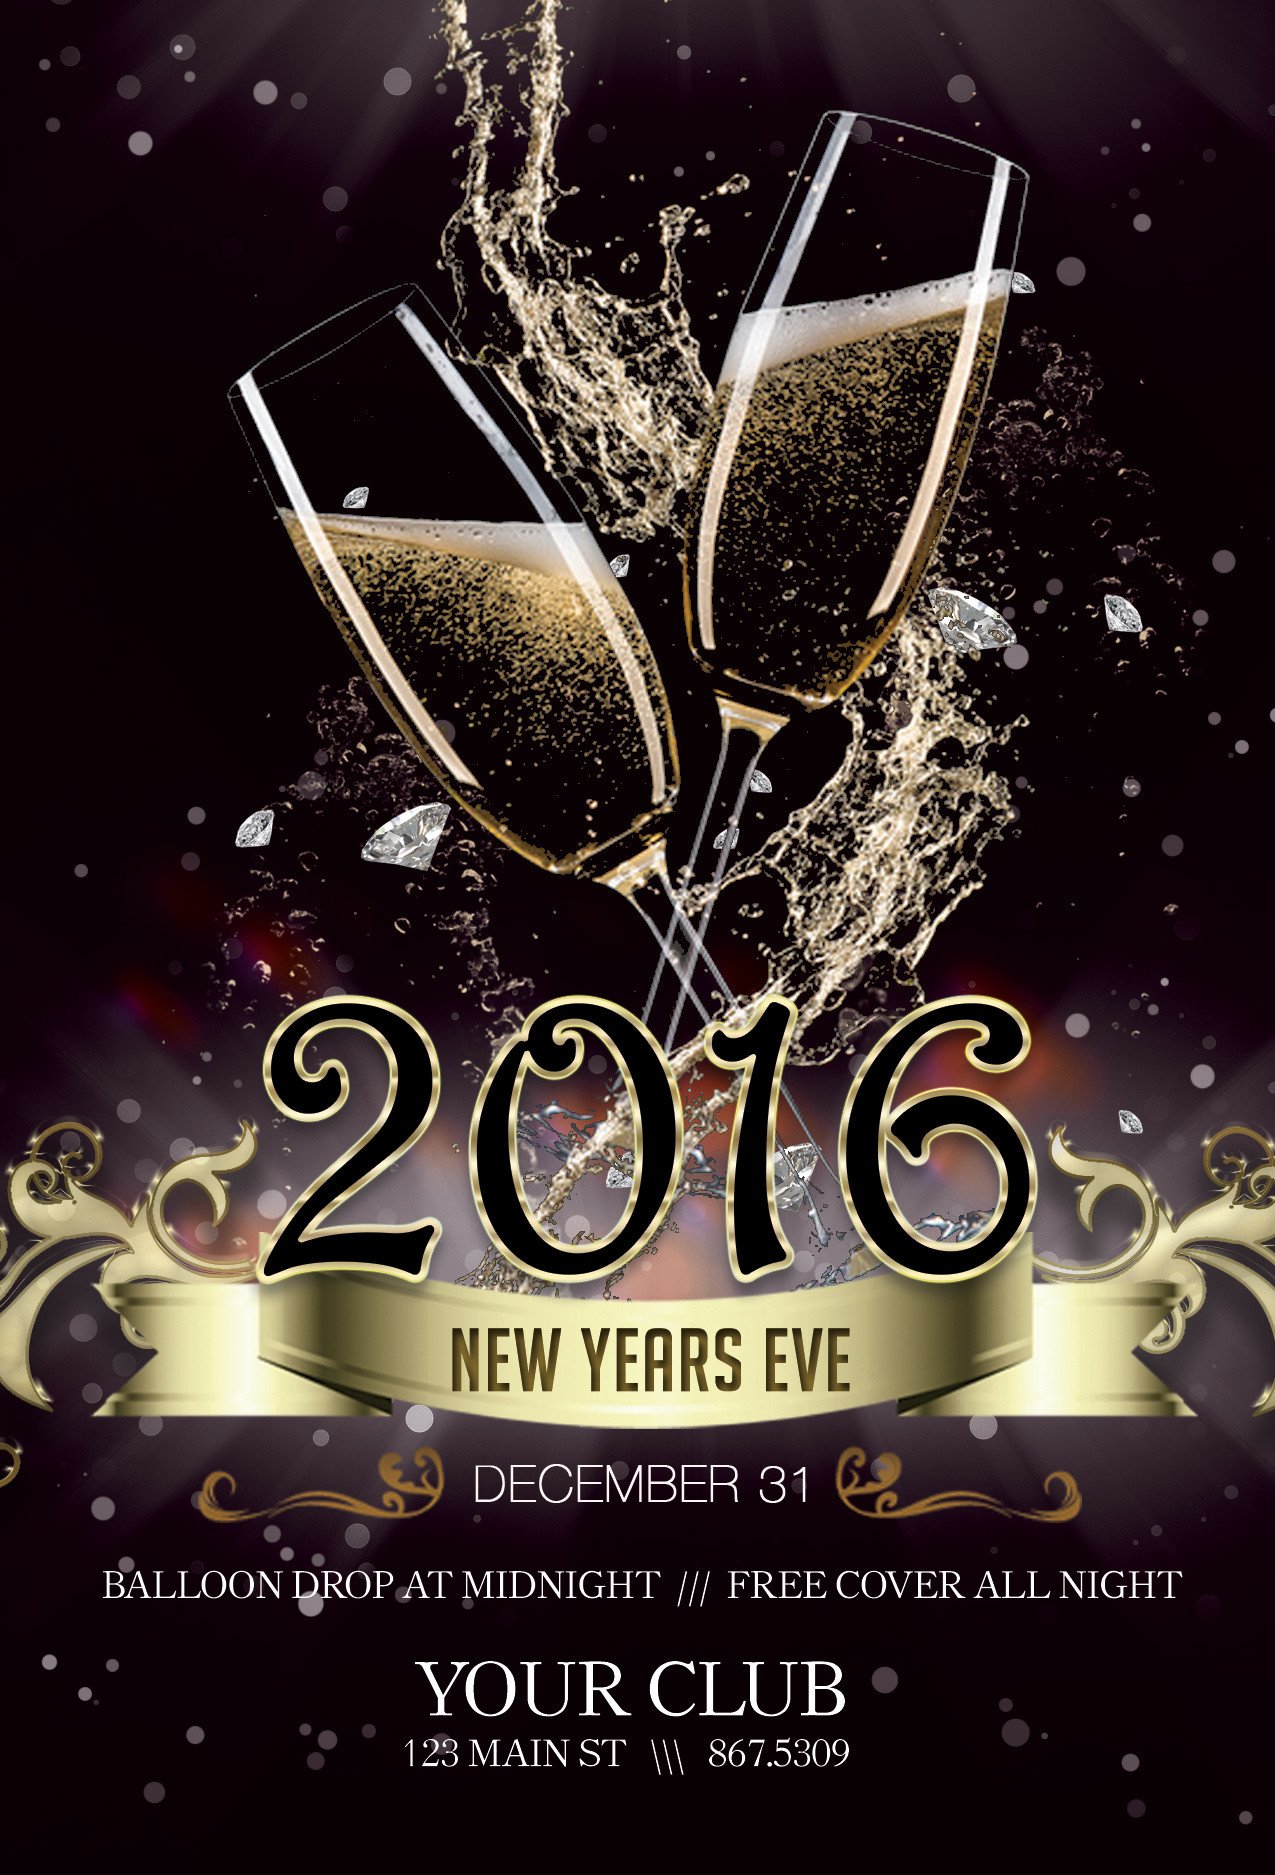 New Years Eve Flyer Club Flyer Fresh View Concepts